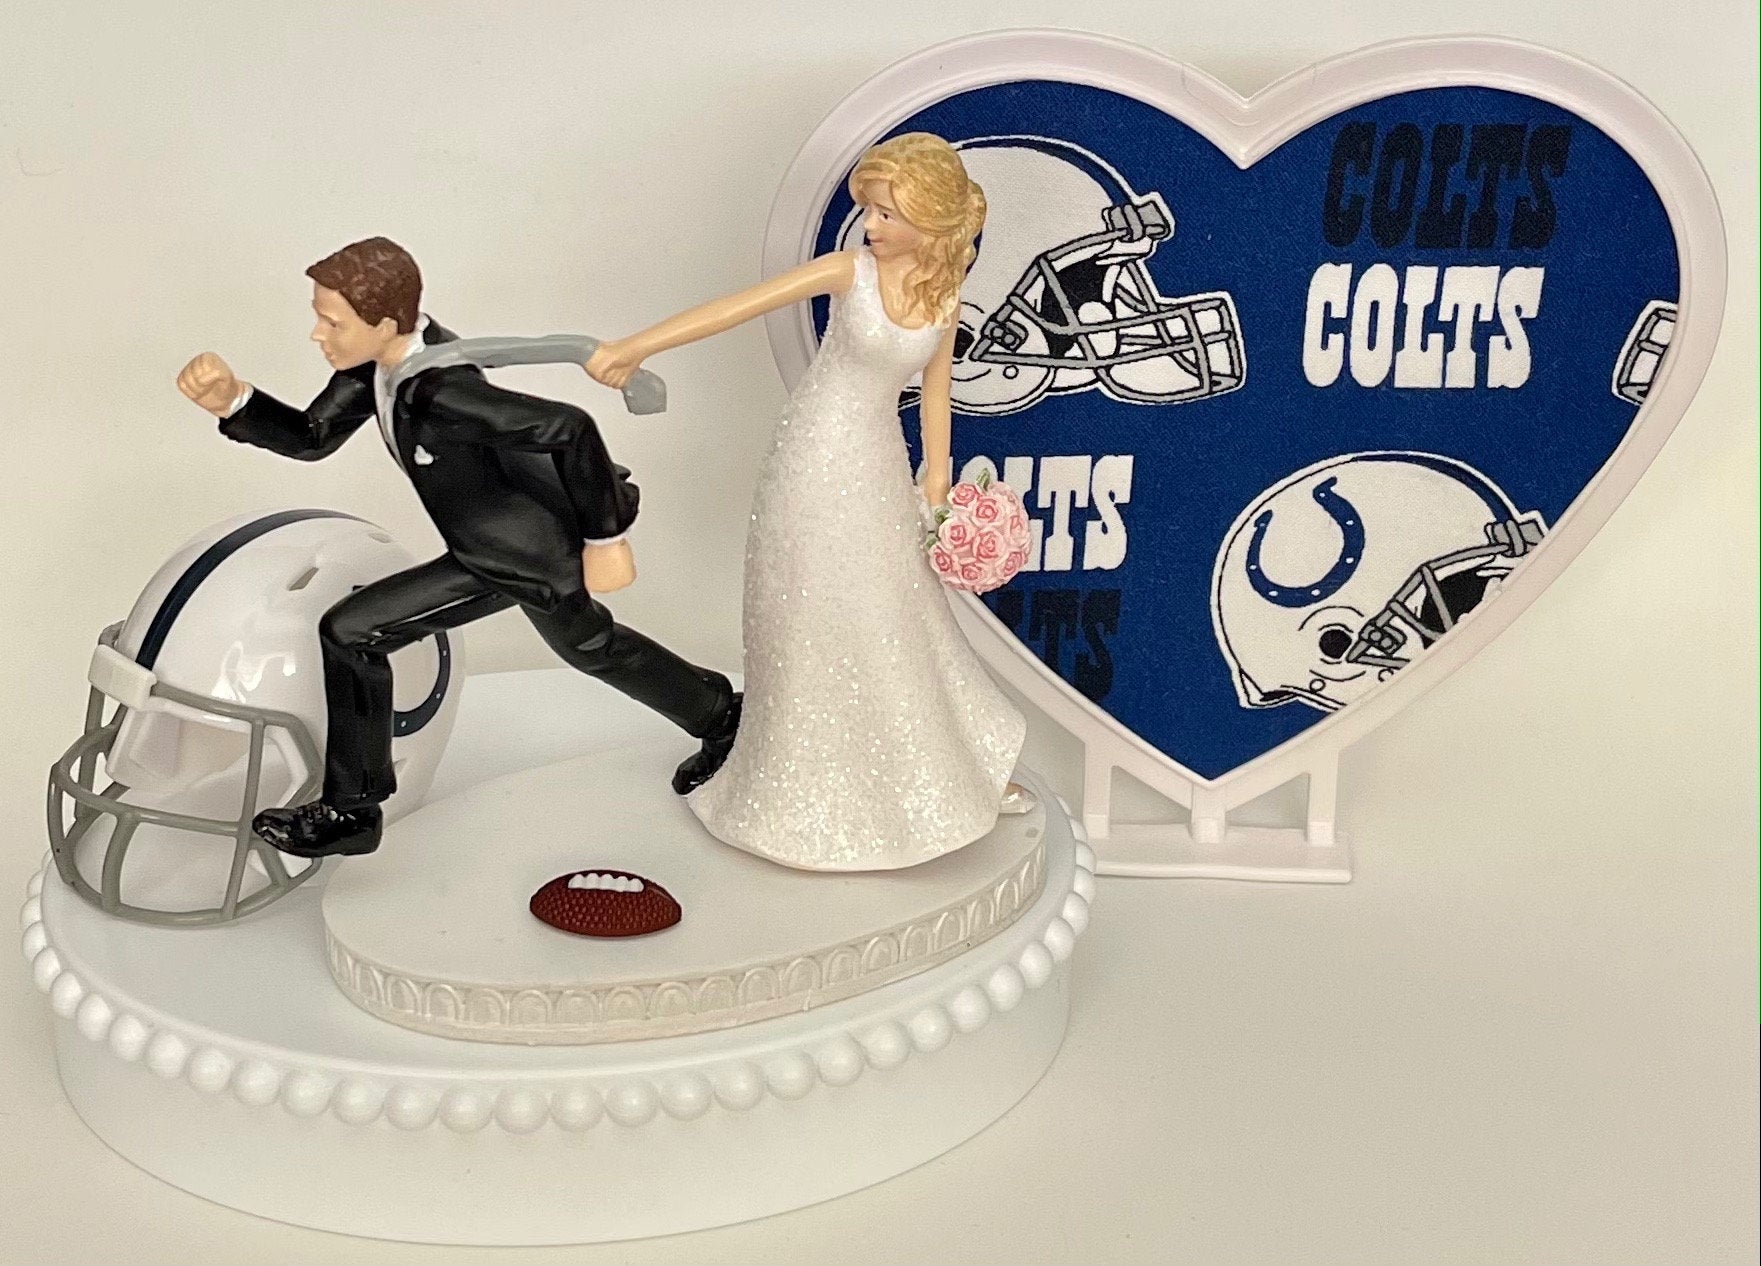 Wedding Cake Topper Indianapolis Colts Football Themed One-of-a-Kind Humorous Groom's Cake Top Indy Sports Fan Funny Bridal Shower Gift Idea